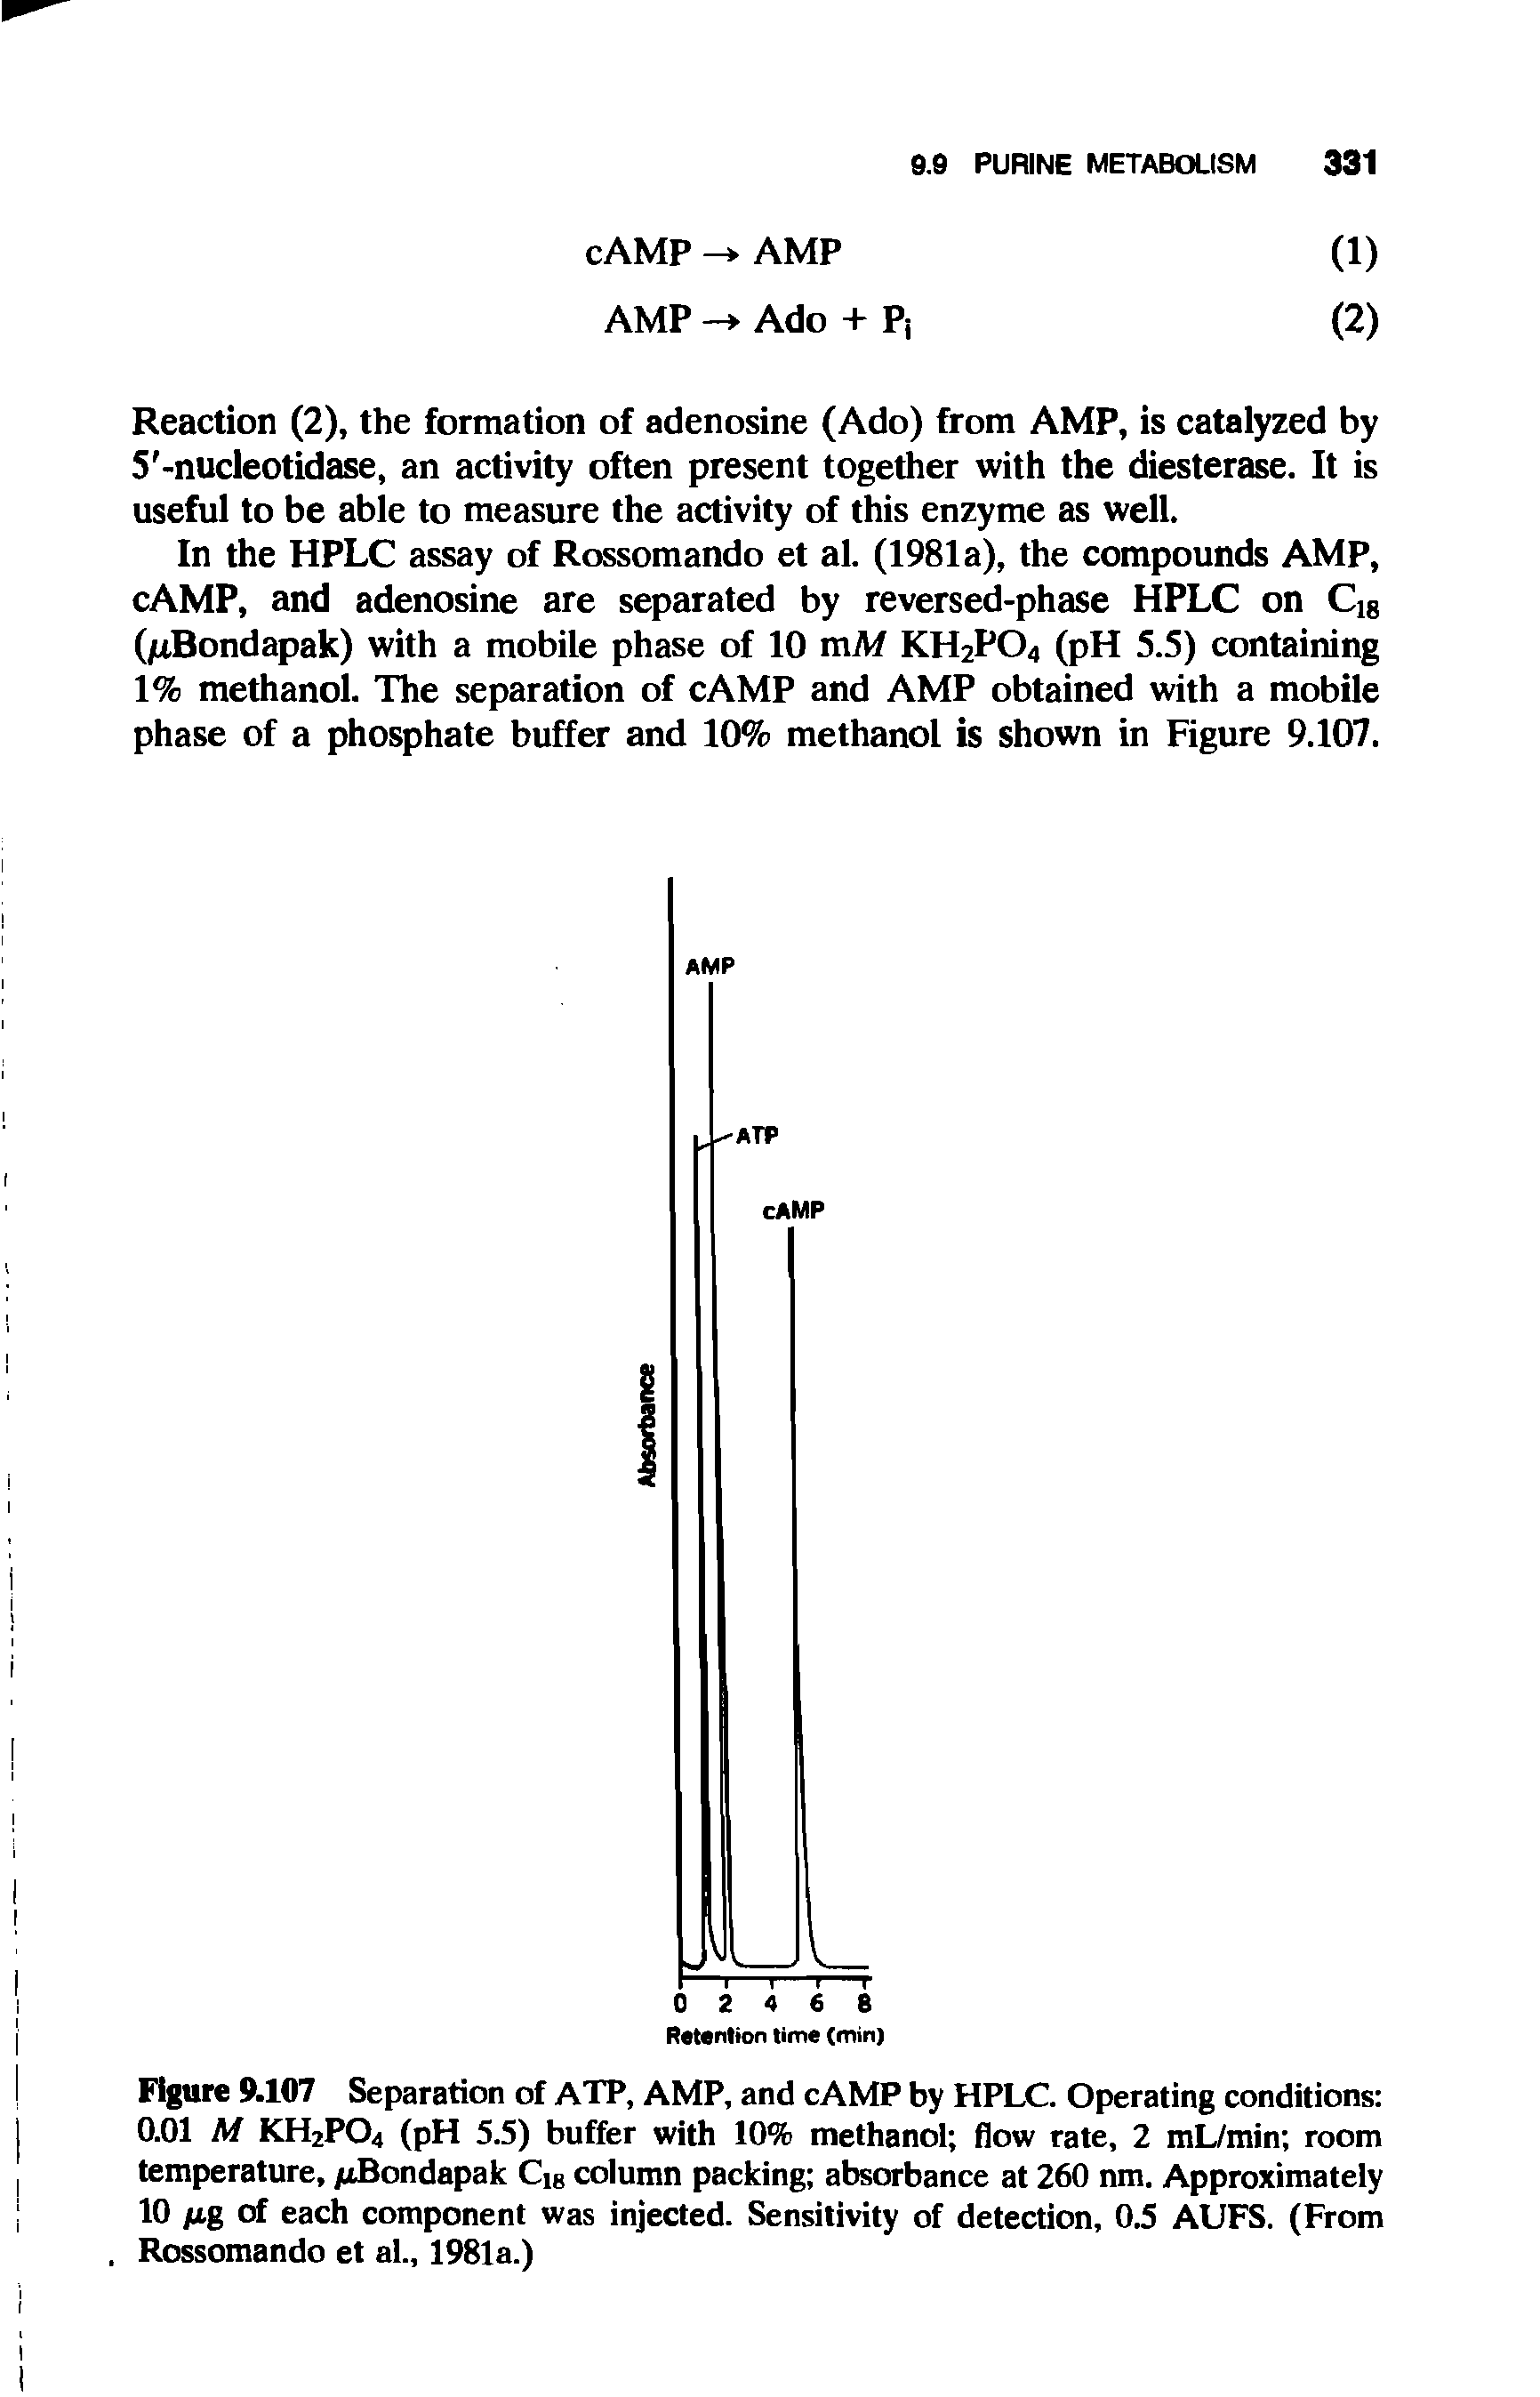 Figure 9.107 Separation of ATP, AMP, and cAMP by HPLC. Operating conditions 0.01 M KH2PO4 (pH 5.5) buffer with 10% methanol flow rate, 2 mL/min room temperature, yuBondapak Ci8 column packing absorbance at 260 nm. Approximately 10 yug of each component was injected. Sensitivity of detection, 0.5 AUFS. (From Rossomando et al., 1981a.)...